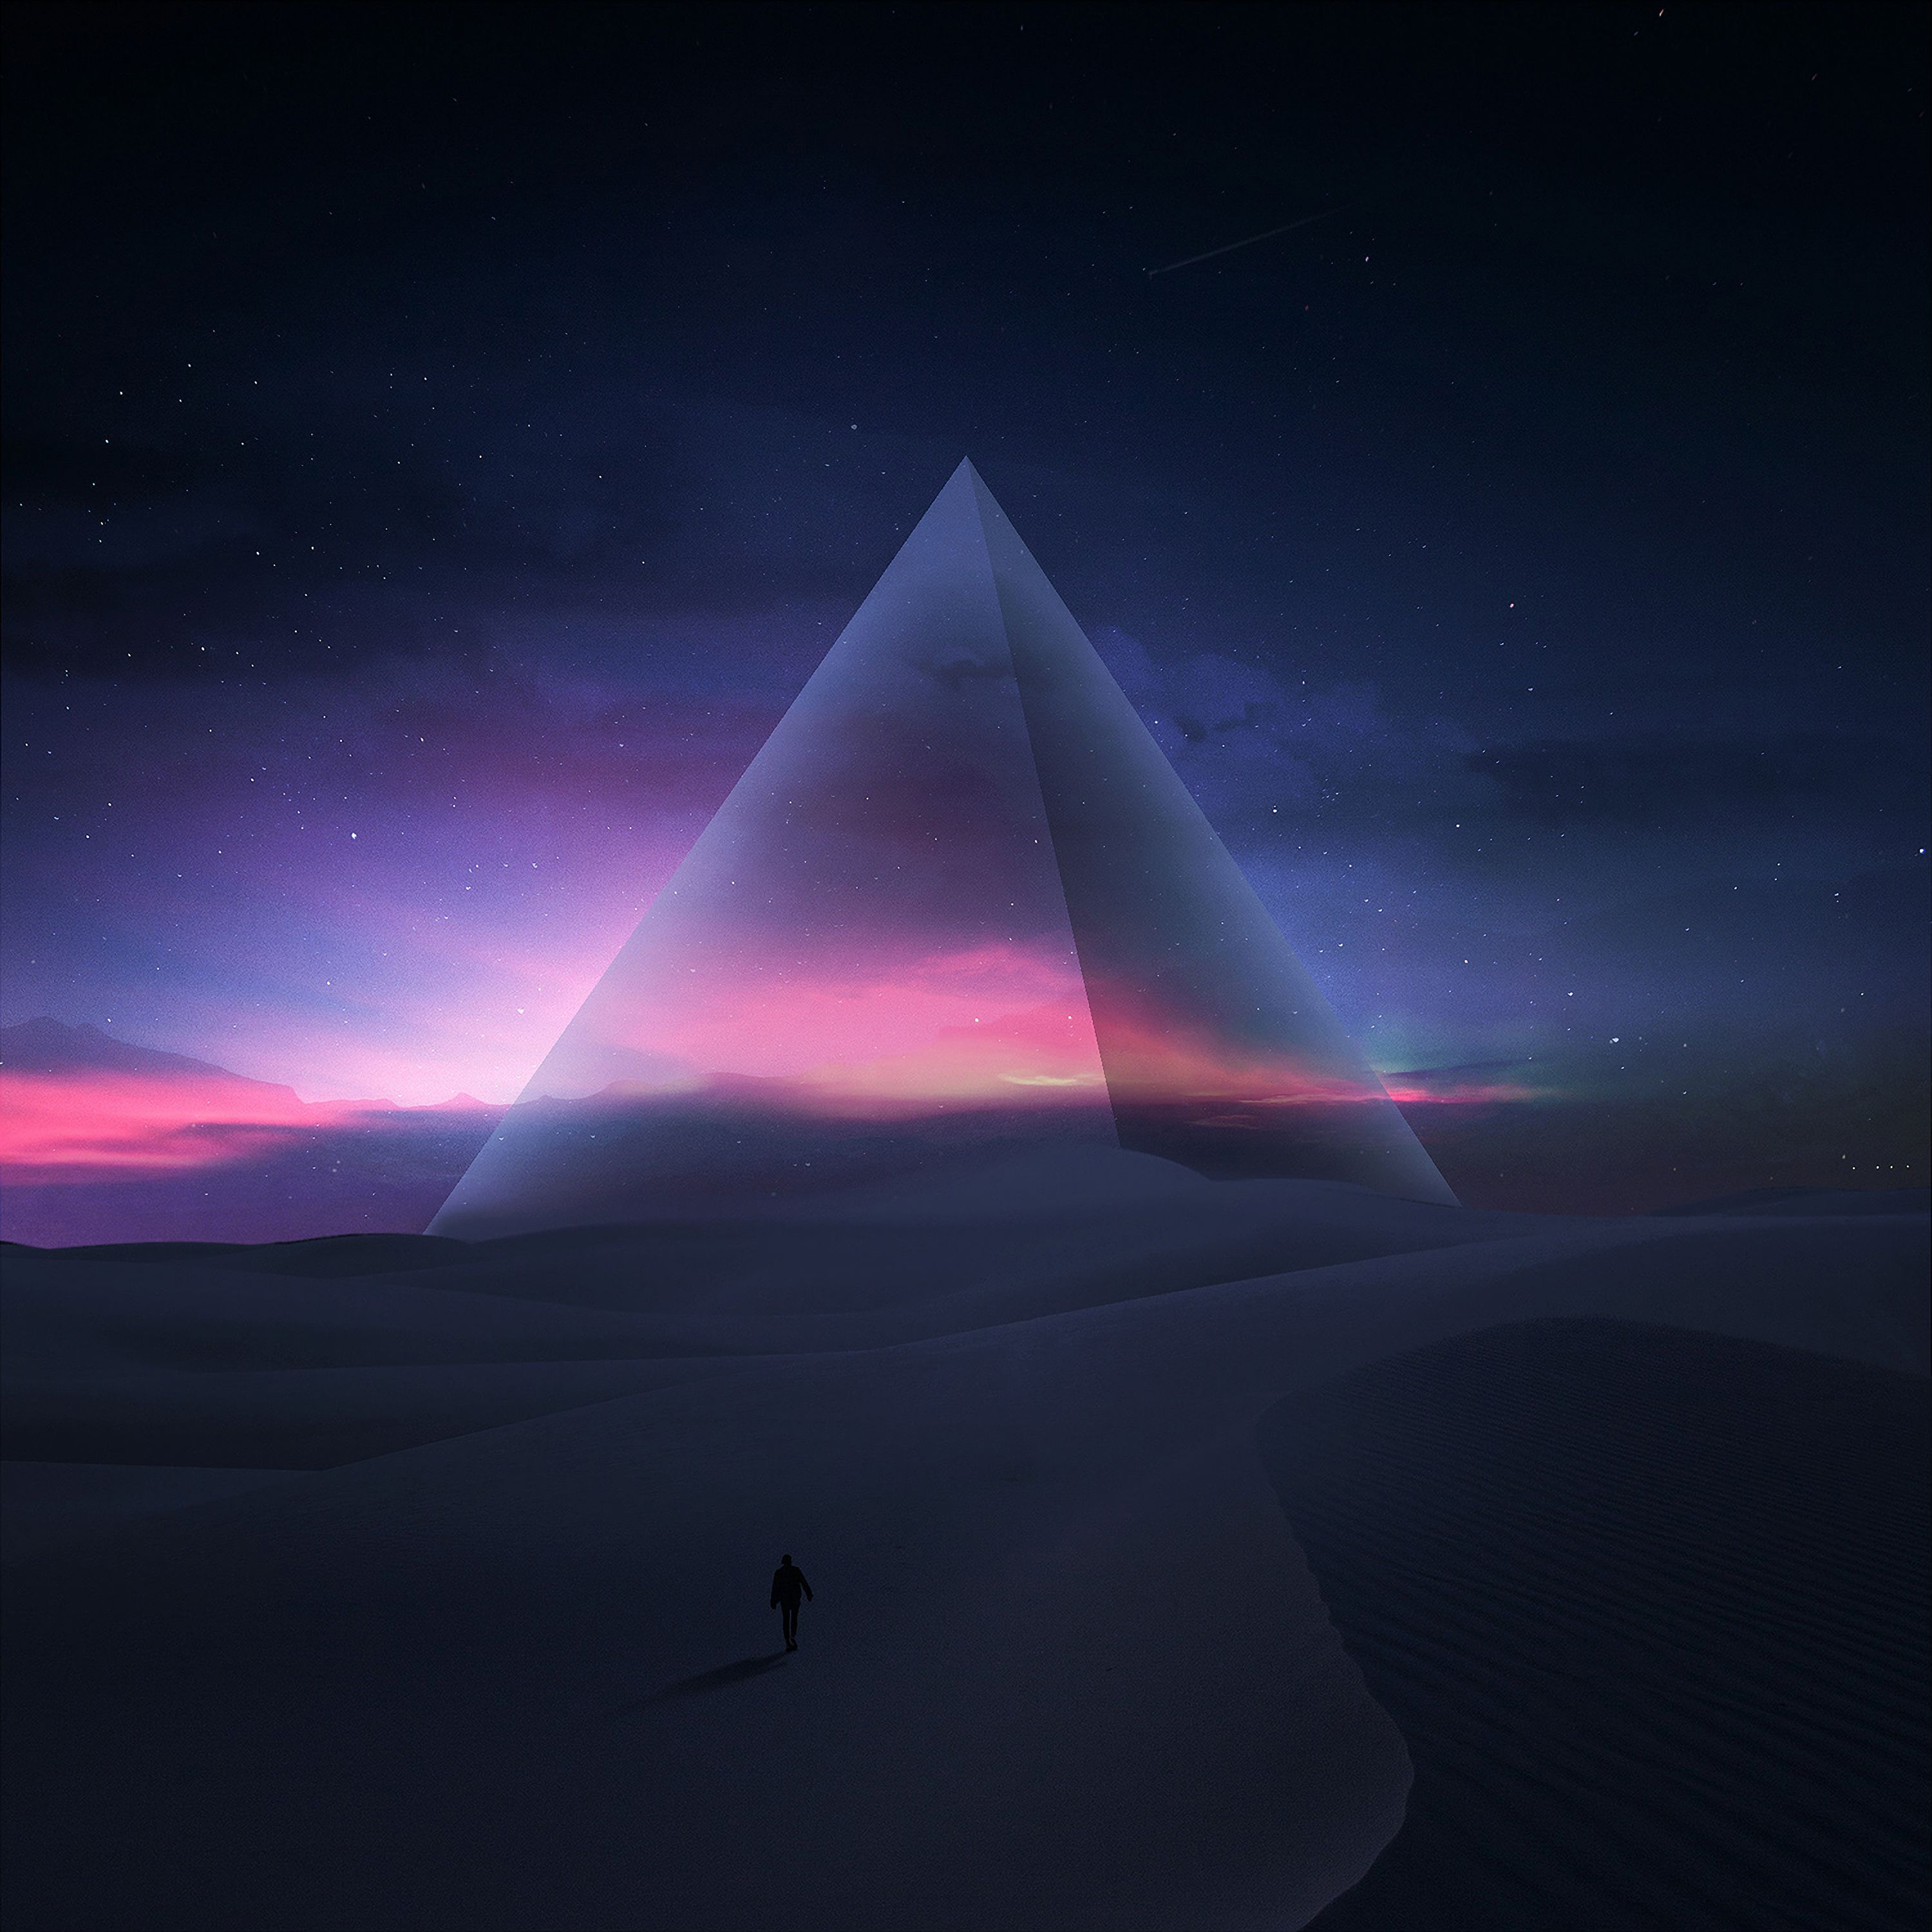 62671 Screensavers and Wallpapers Pyramid for phone. Download art, pyramid, stars, desert, silhouette, starry sky pictures for free